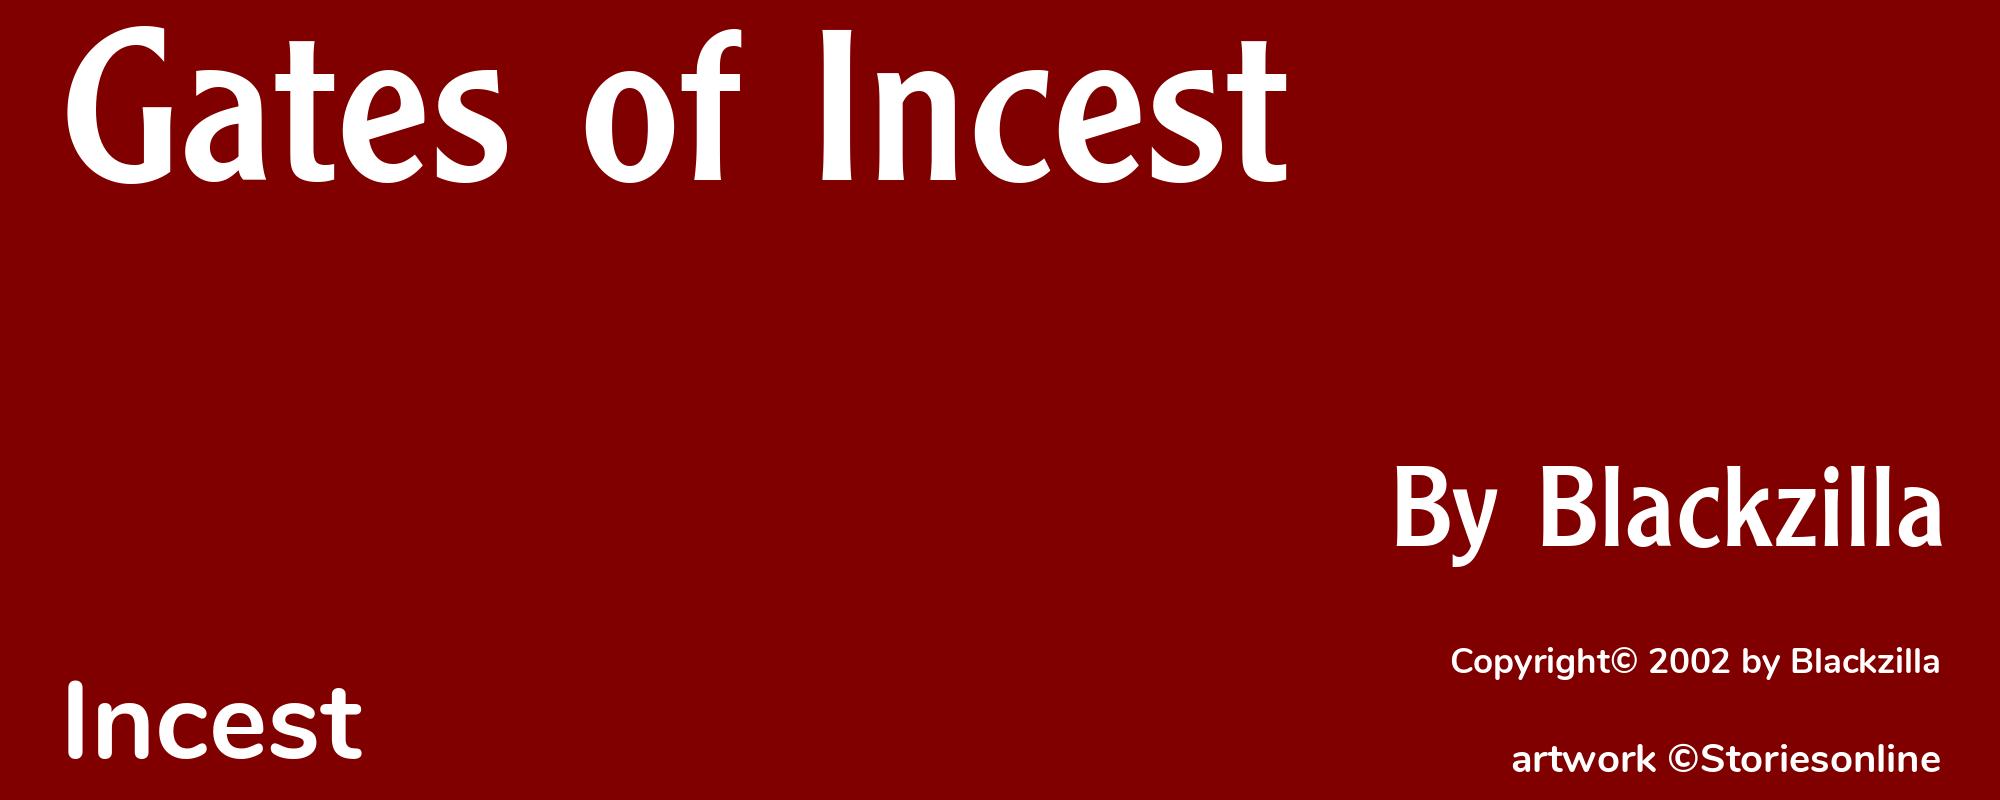 Gates of Incest - Cover